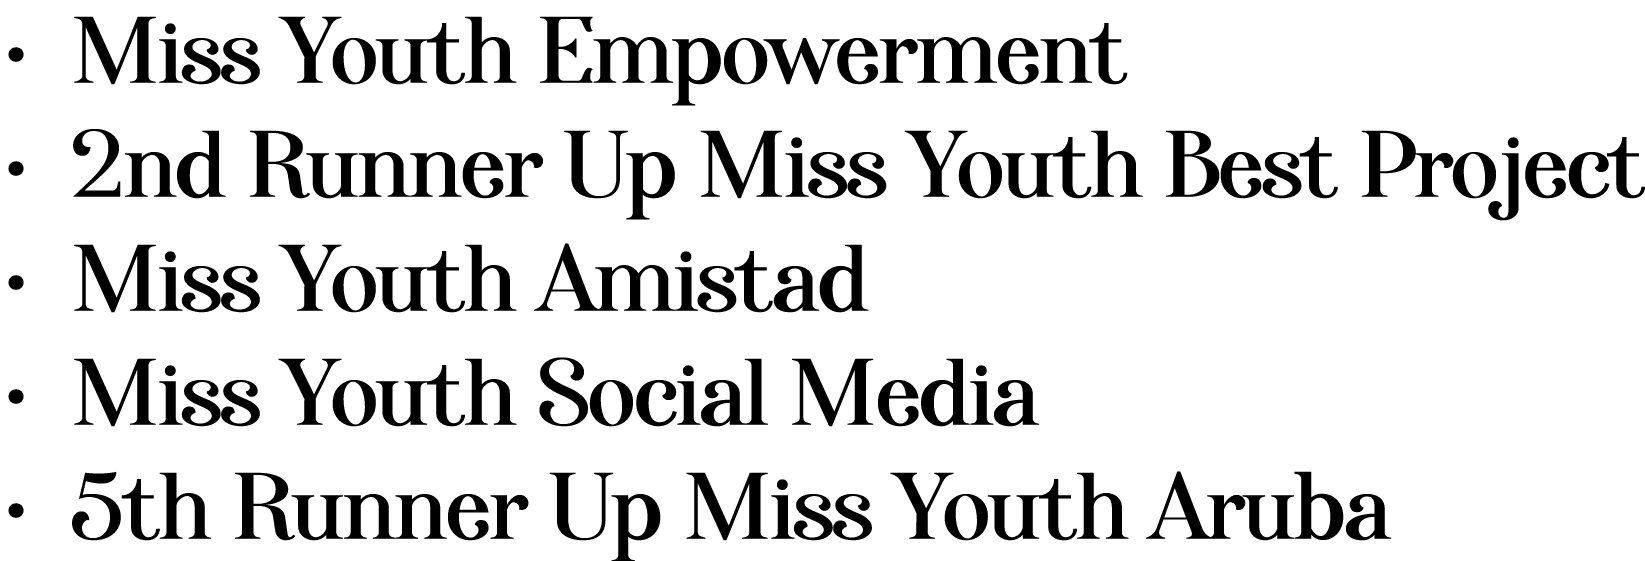   Miss Youth Empowerment   2nd Runner Up Miss Youth Best Project   Miss Youth Amistad   Miss Youth Social Media   5th   